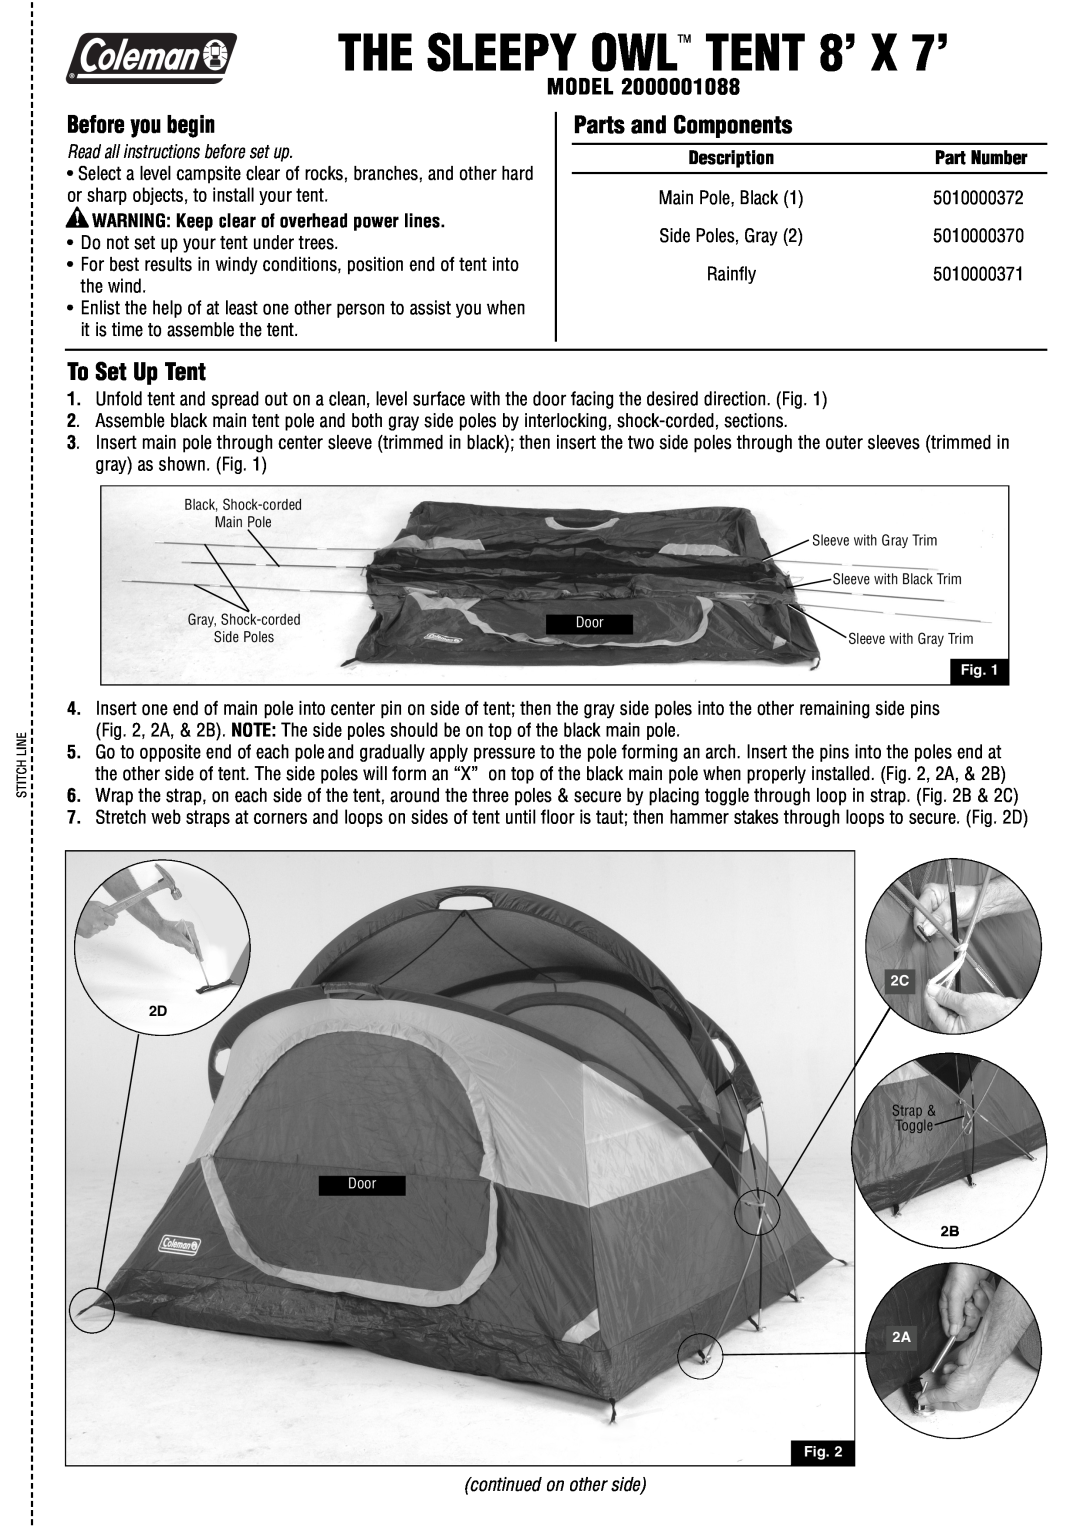 Coleman 2000001088 manual Before you begin, Parts and Components, To Set Up Tent, Part Number, Model 